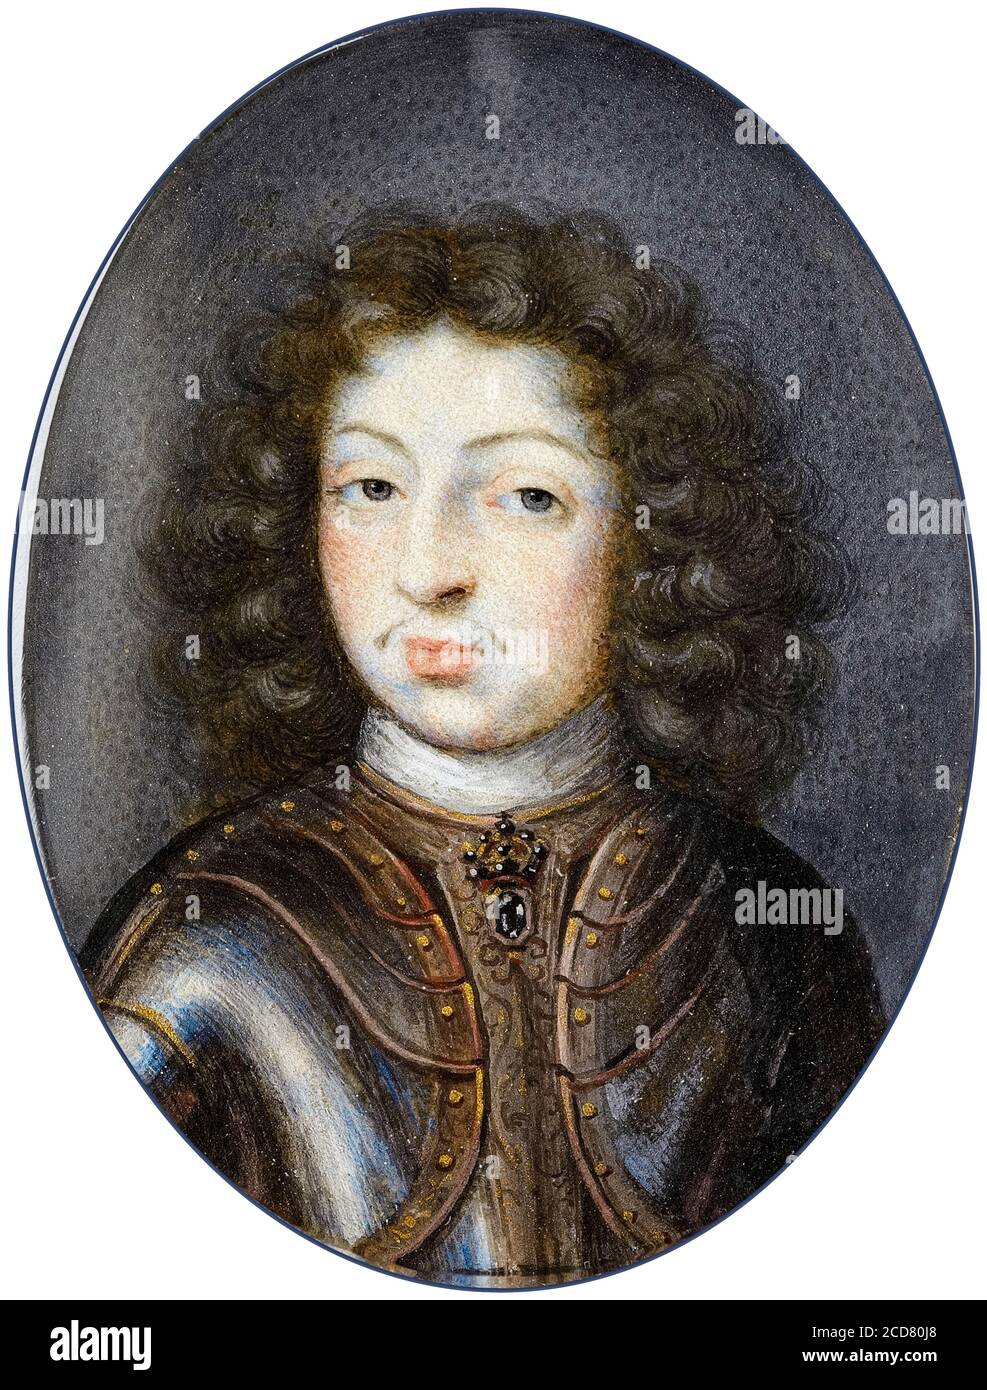 Charles XI (1655-1697), King of Sweden, portrait miniature by Pierre Signac, 1672-1675 Stock Photo